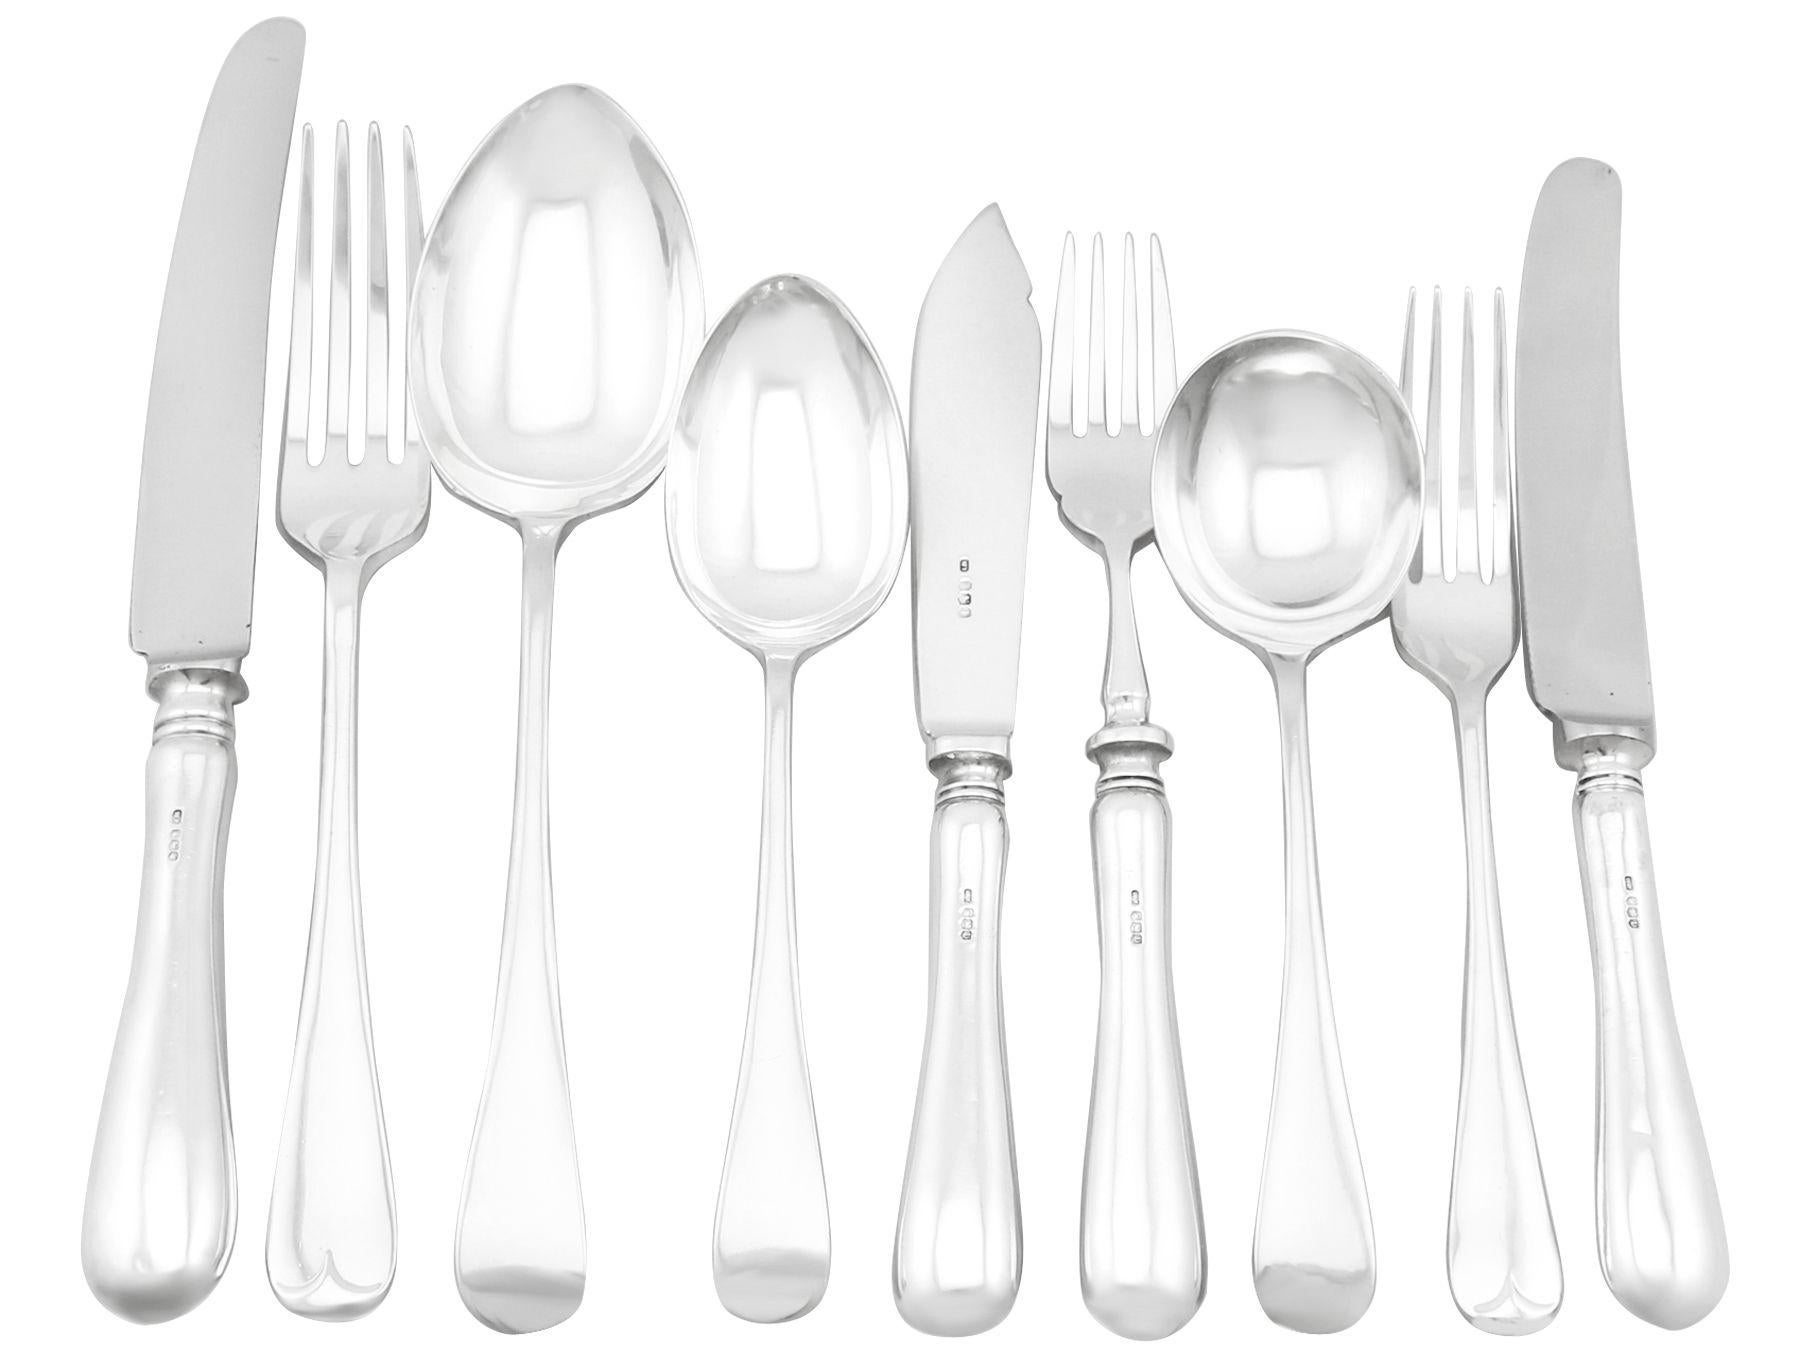 An exceptional, fine and impressive vintage Elizabeth II English sterling silver straight Old English pattern flatware service for six persons; an addition to our antique flatware sets.

The pieces of this exceptional vintage straight* sterling